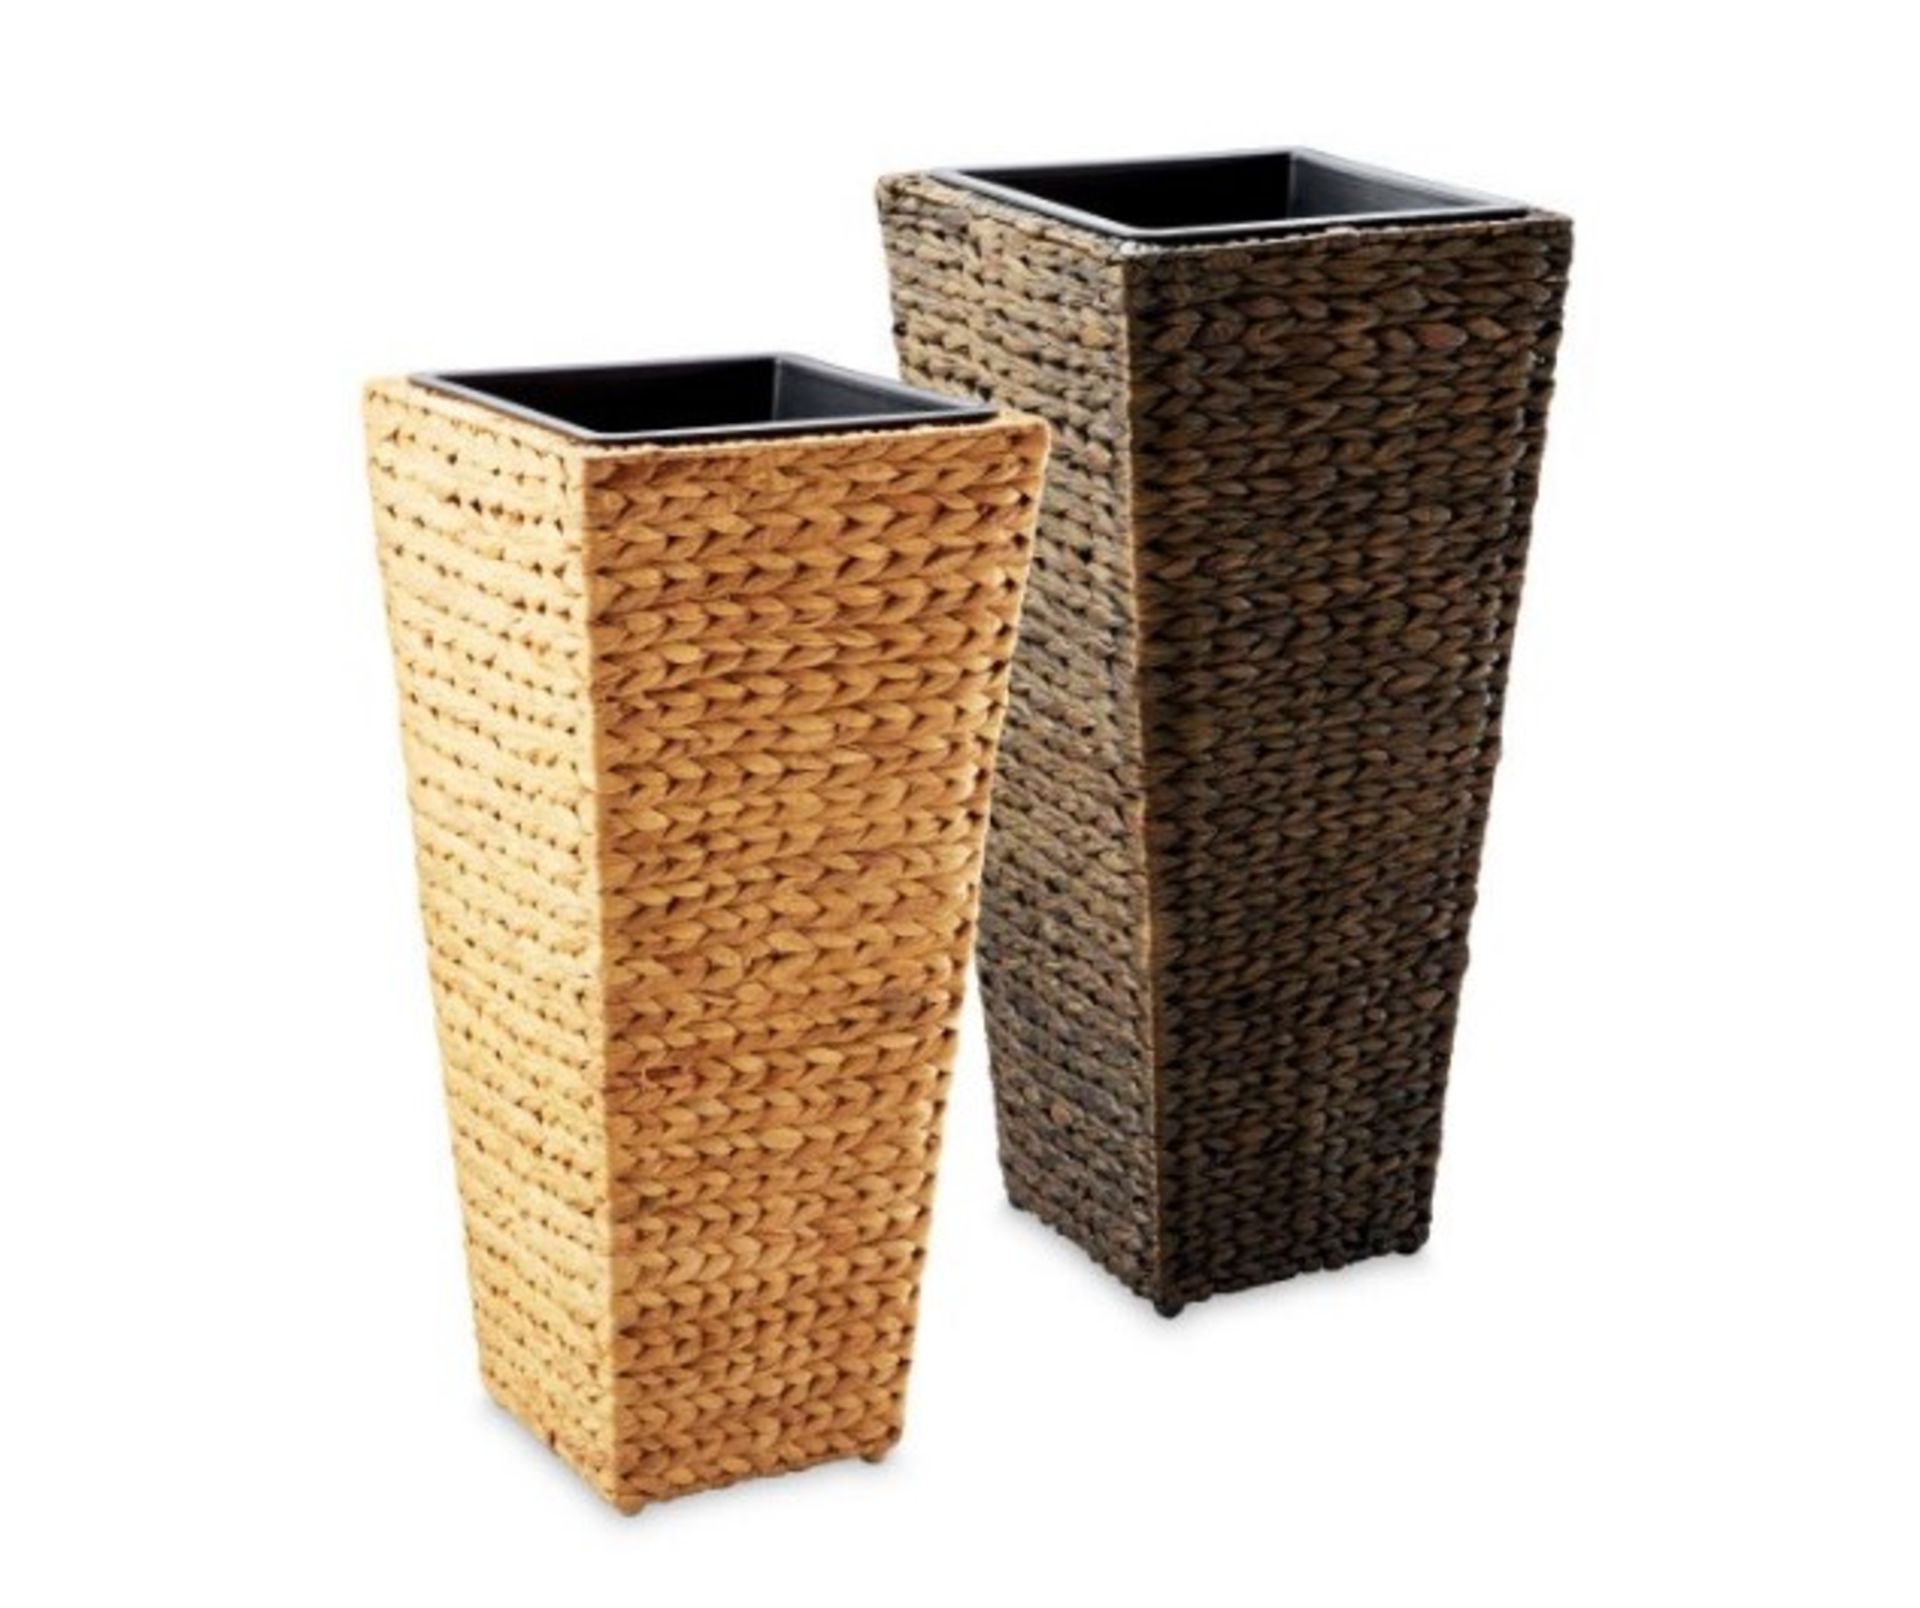 V Brand New 60cm Rattan Weave Planter - With Removable Planting Bin - Feet for Floor Protection - - Image 3 of 3